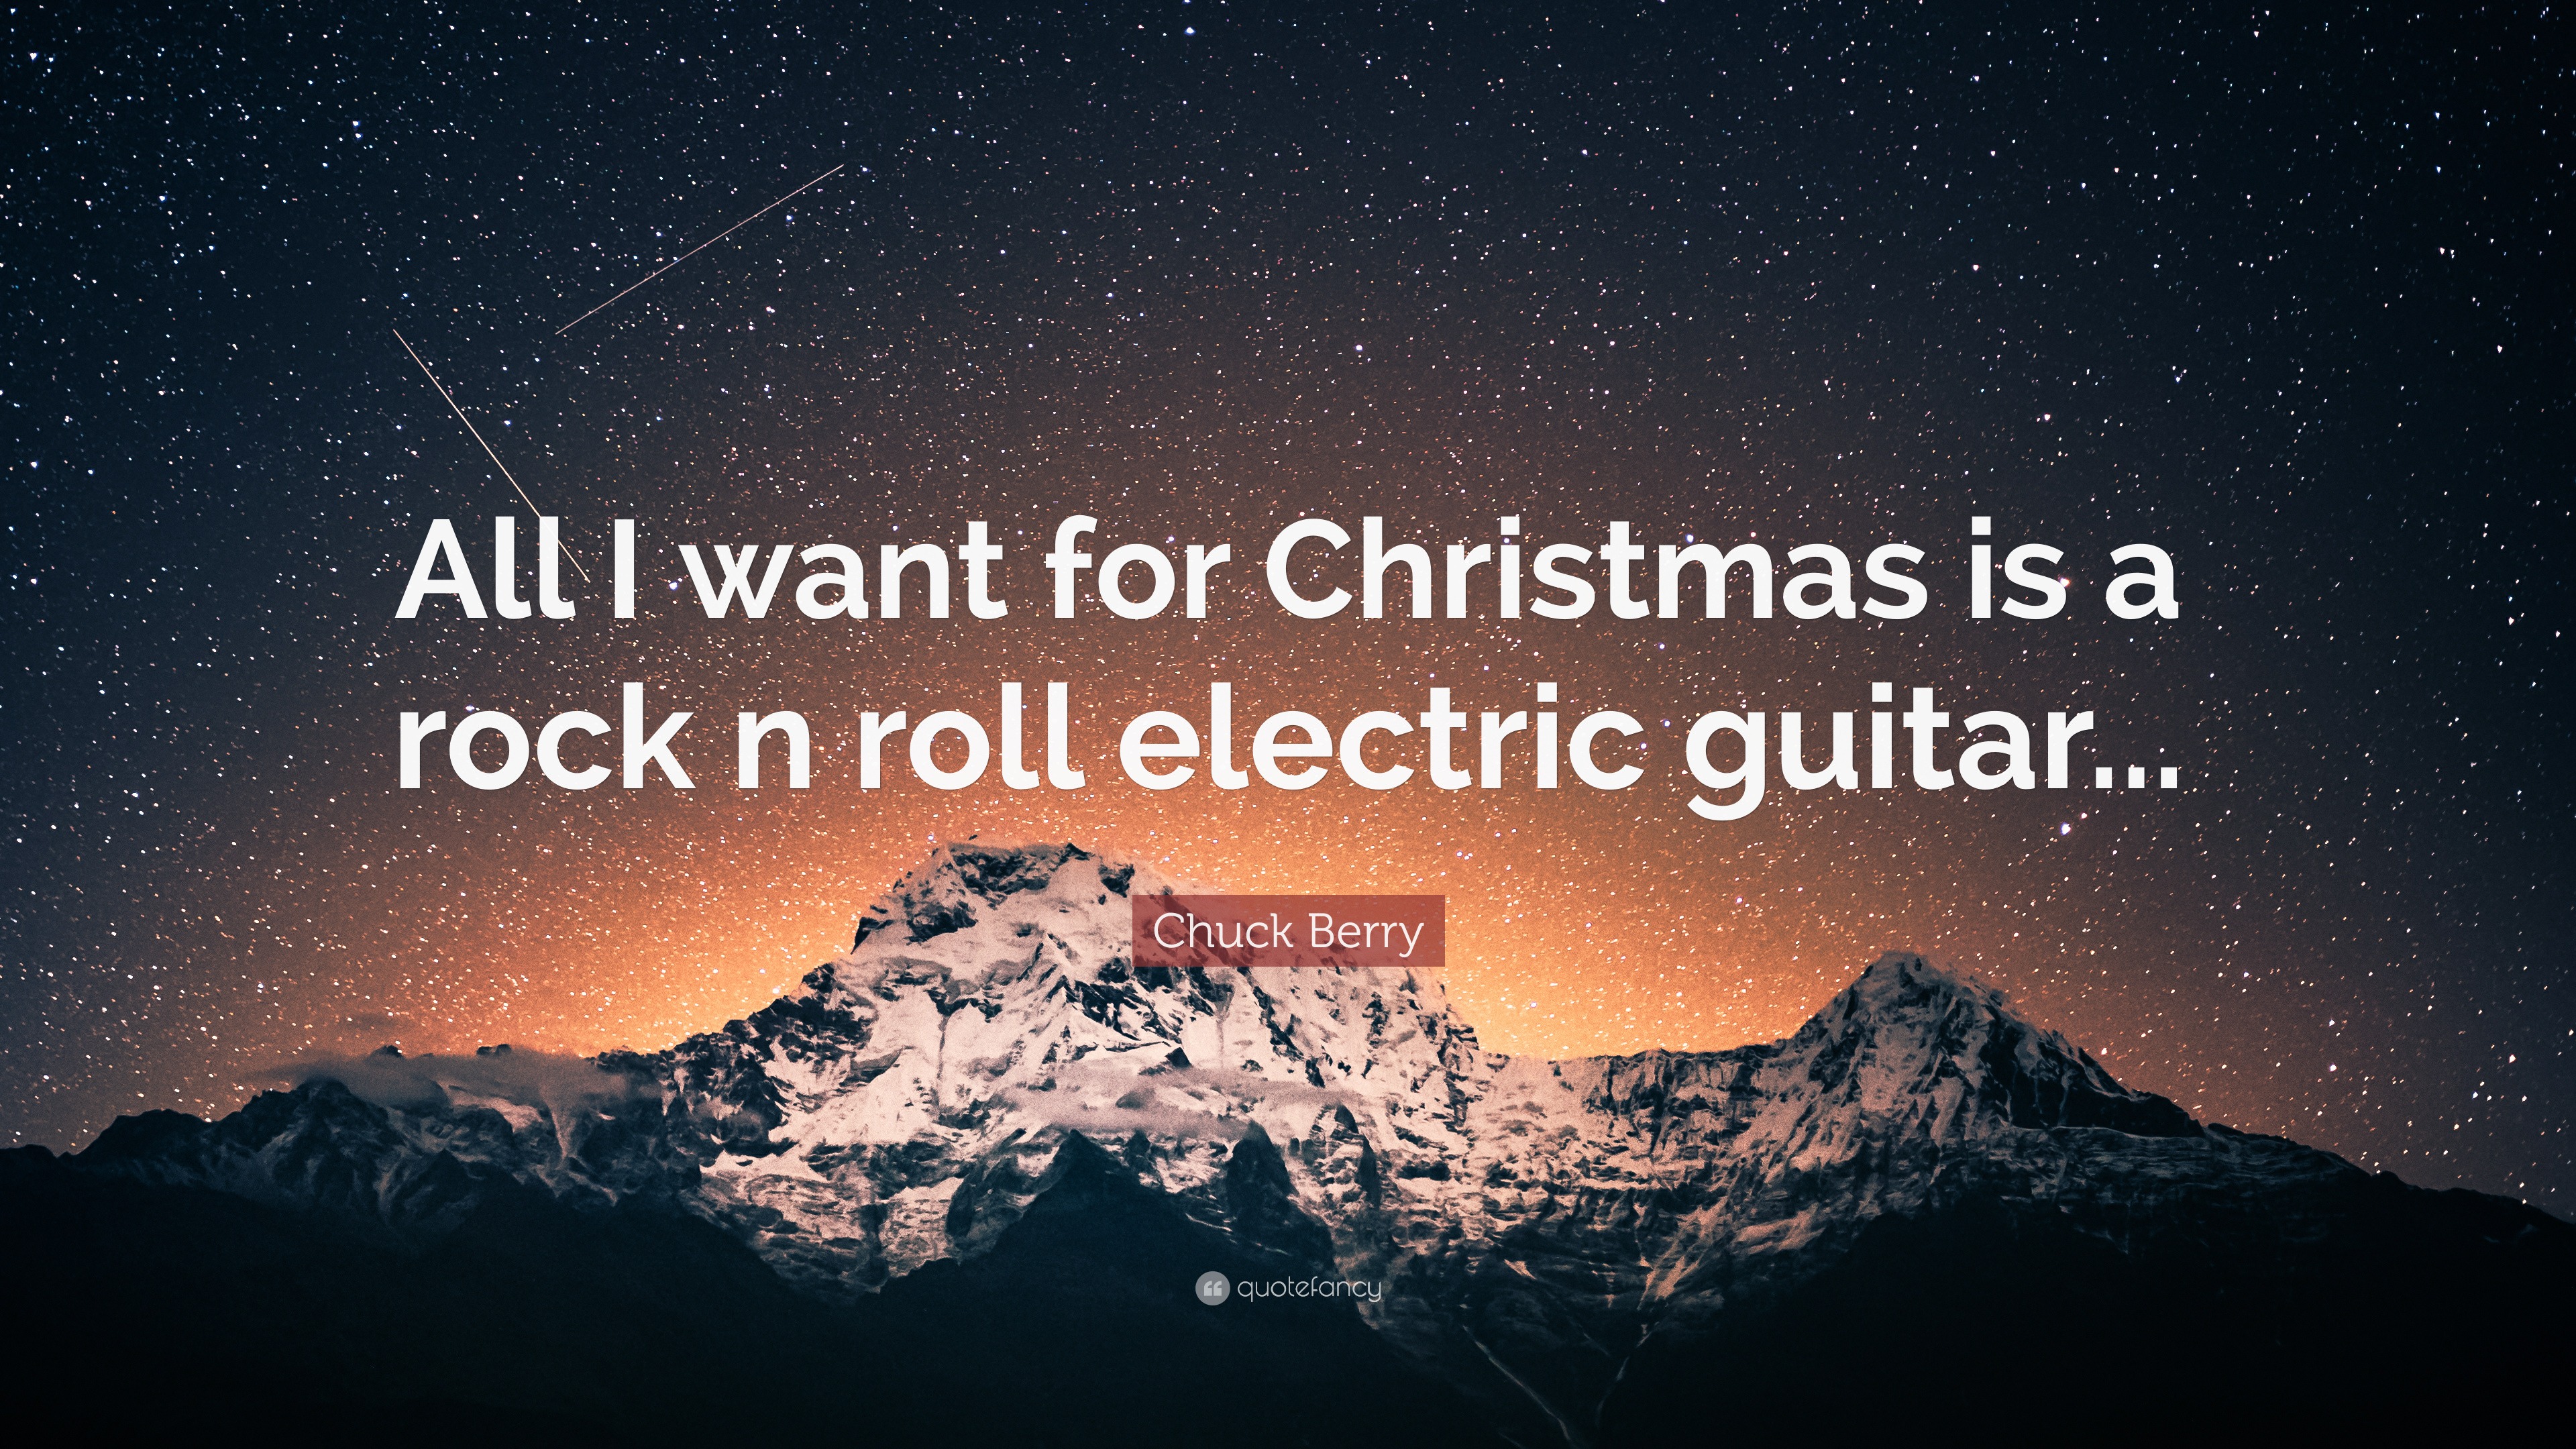 Chuck Berry Quote: “All I want for Christmas is a rock n roll electric guitar...” (7 wallpapers ...